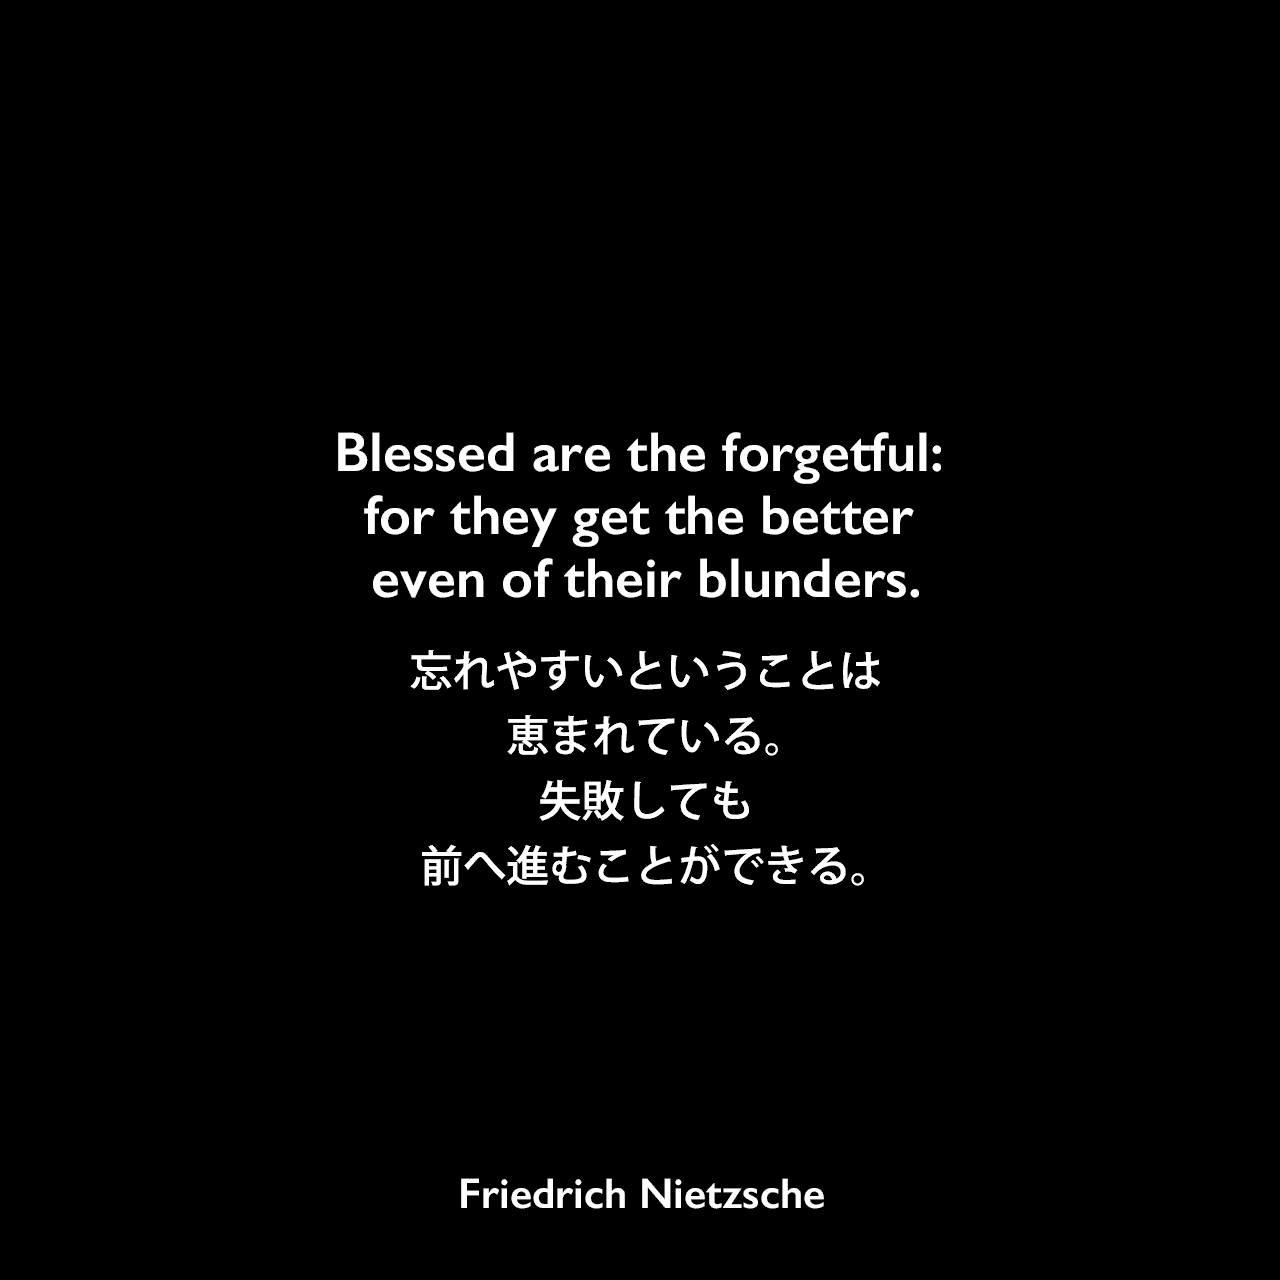 Blessed are the forgetful: for they get the better even of their blunders.忘れやすいということは恵まれている。失敗しても前へ進むことができる。